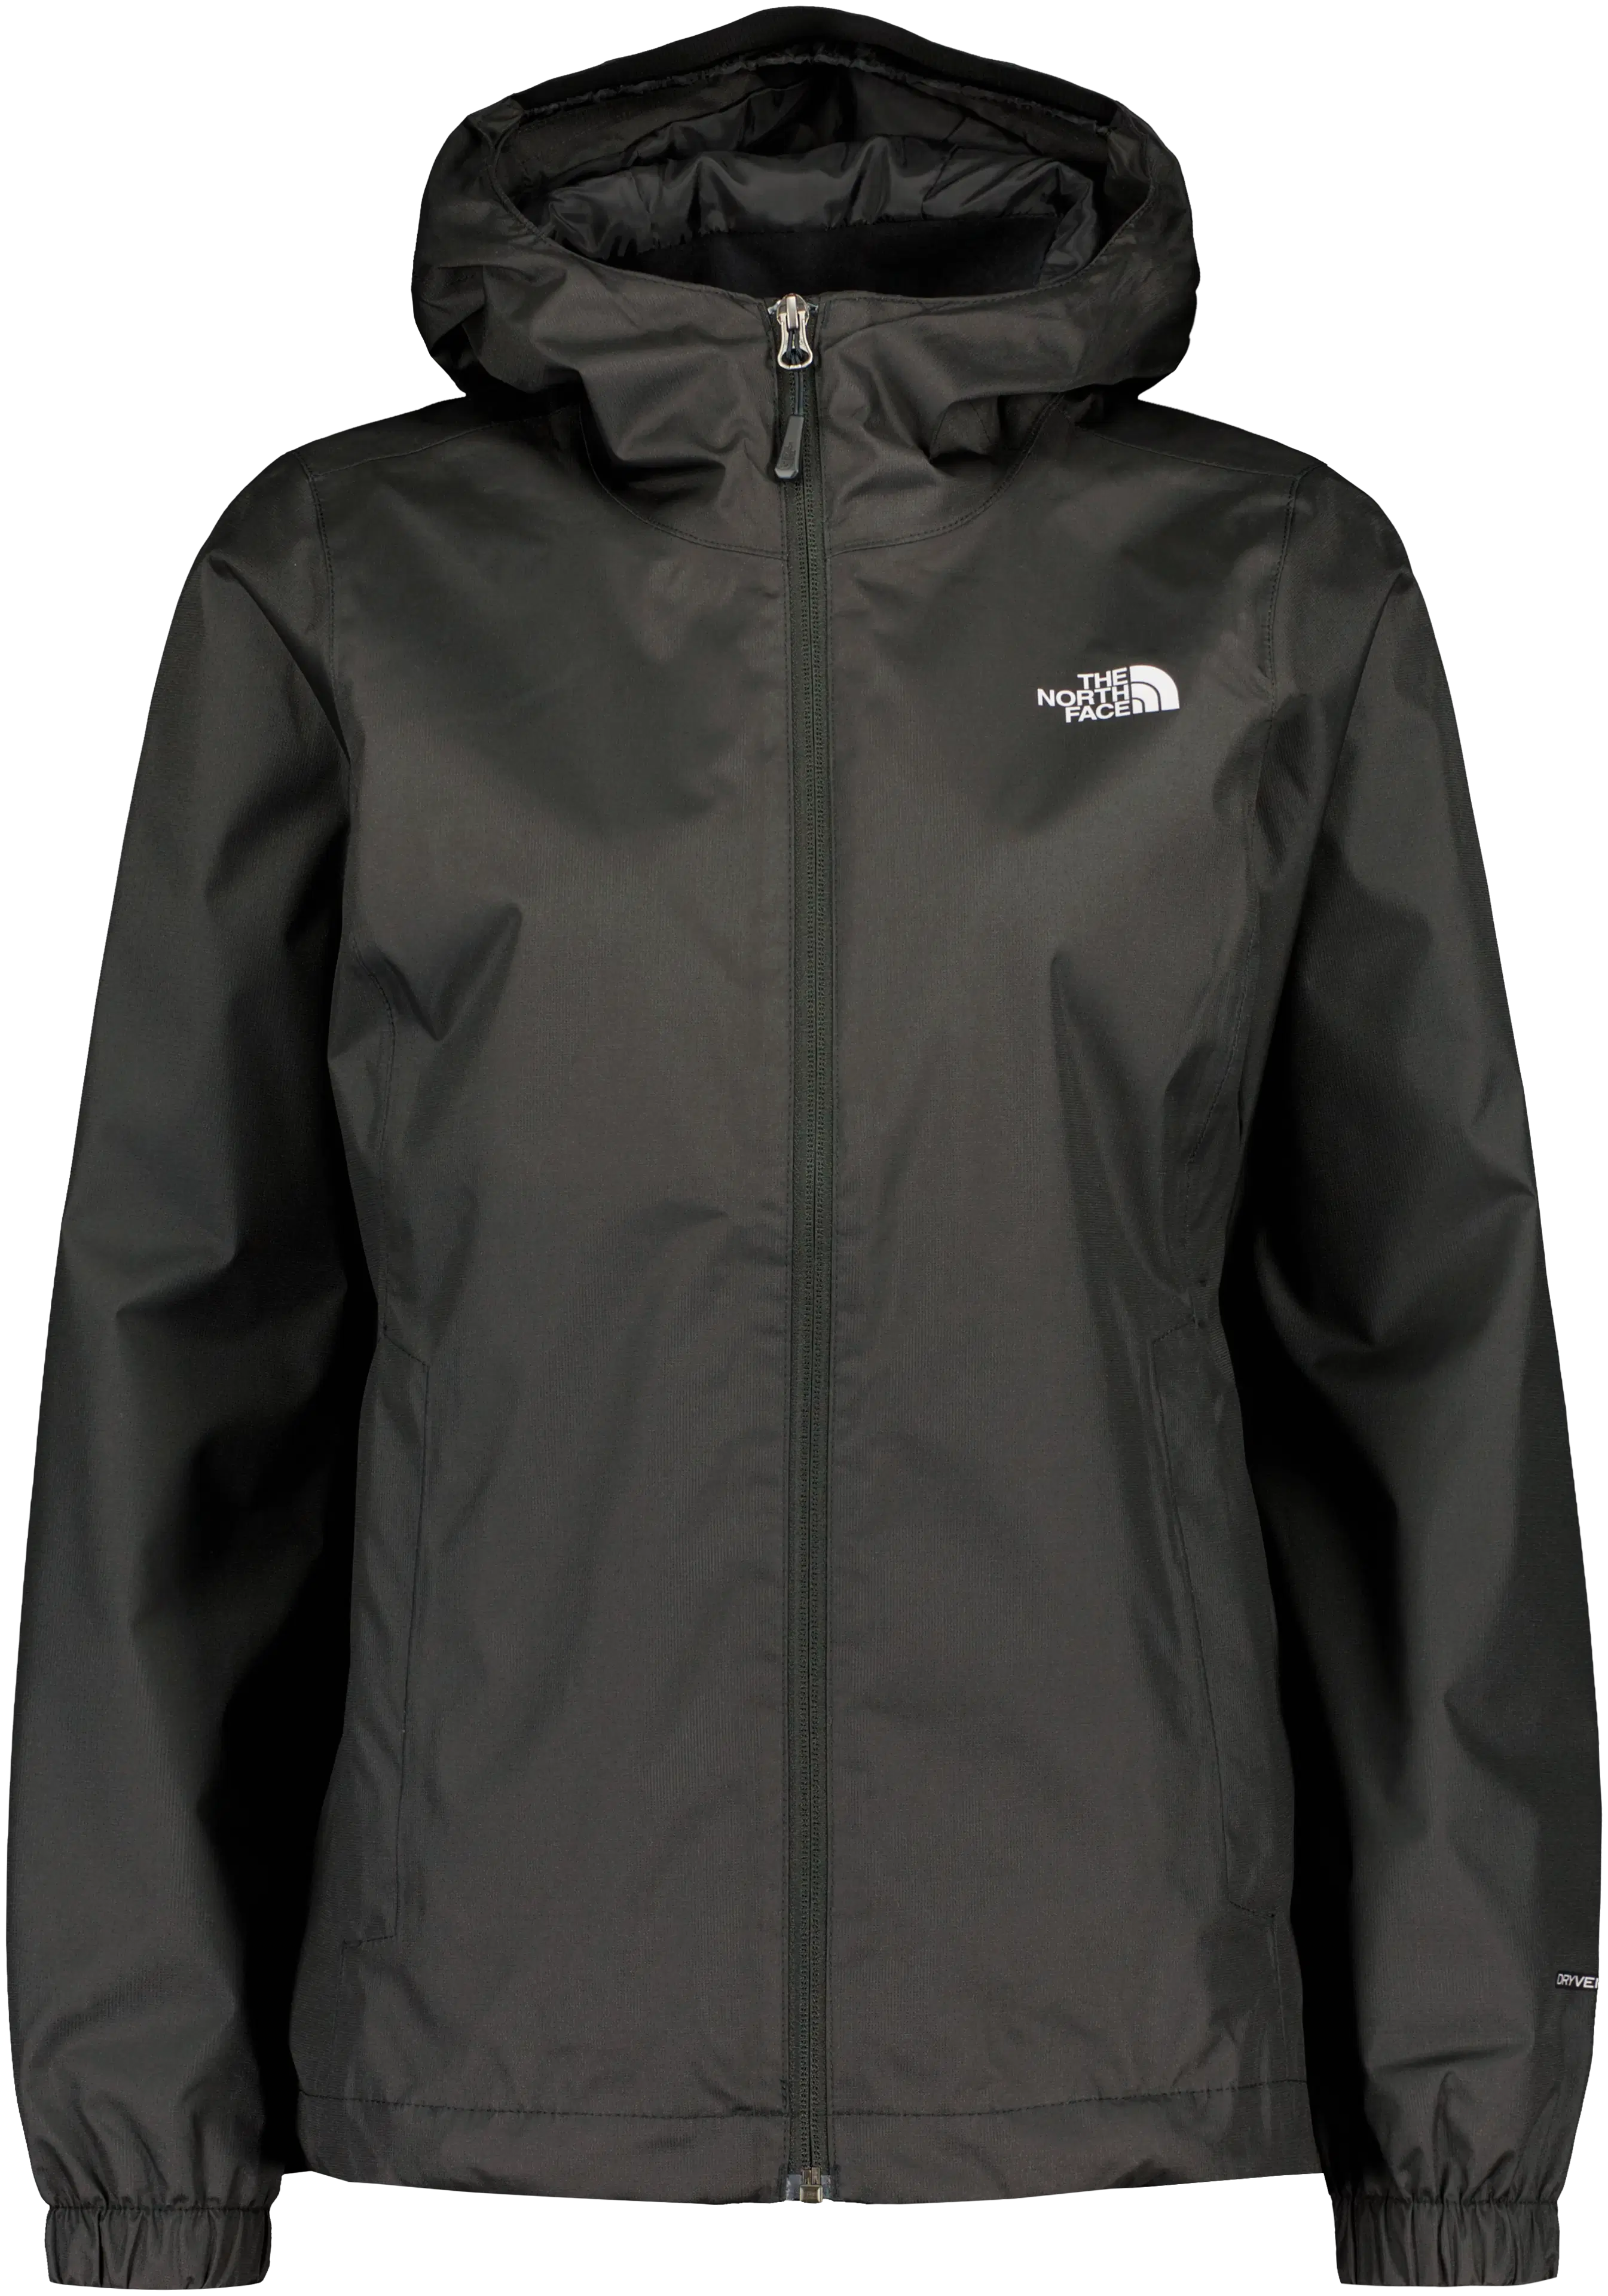 The North Face quest takki